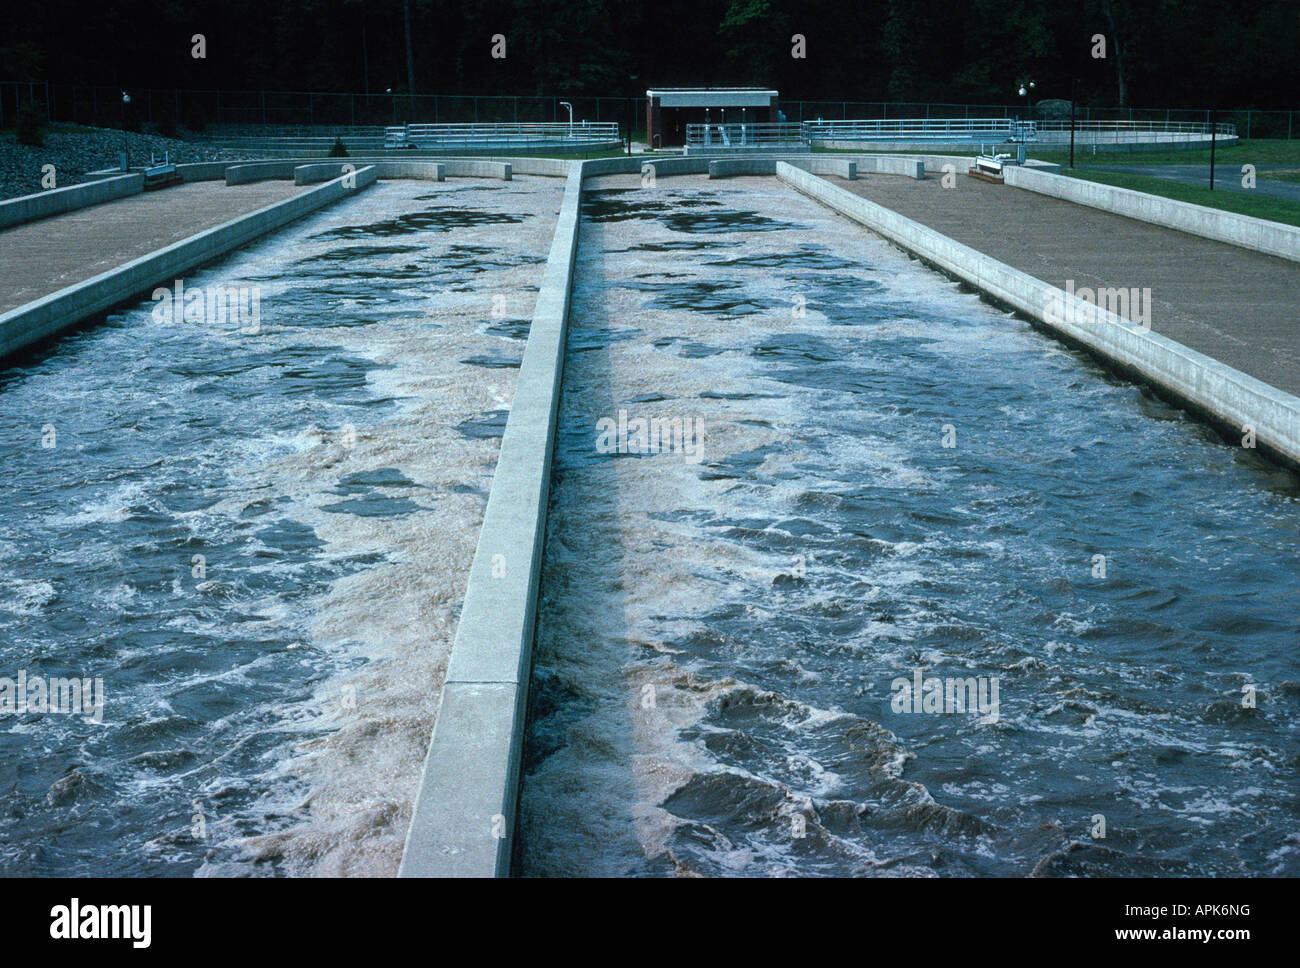 Activated sludge secondary treatment system at a sewage treatment plant. Stock Photo